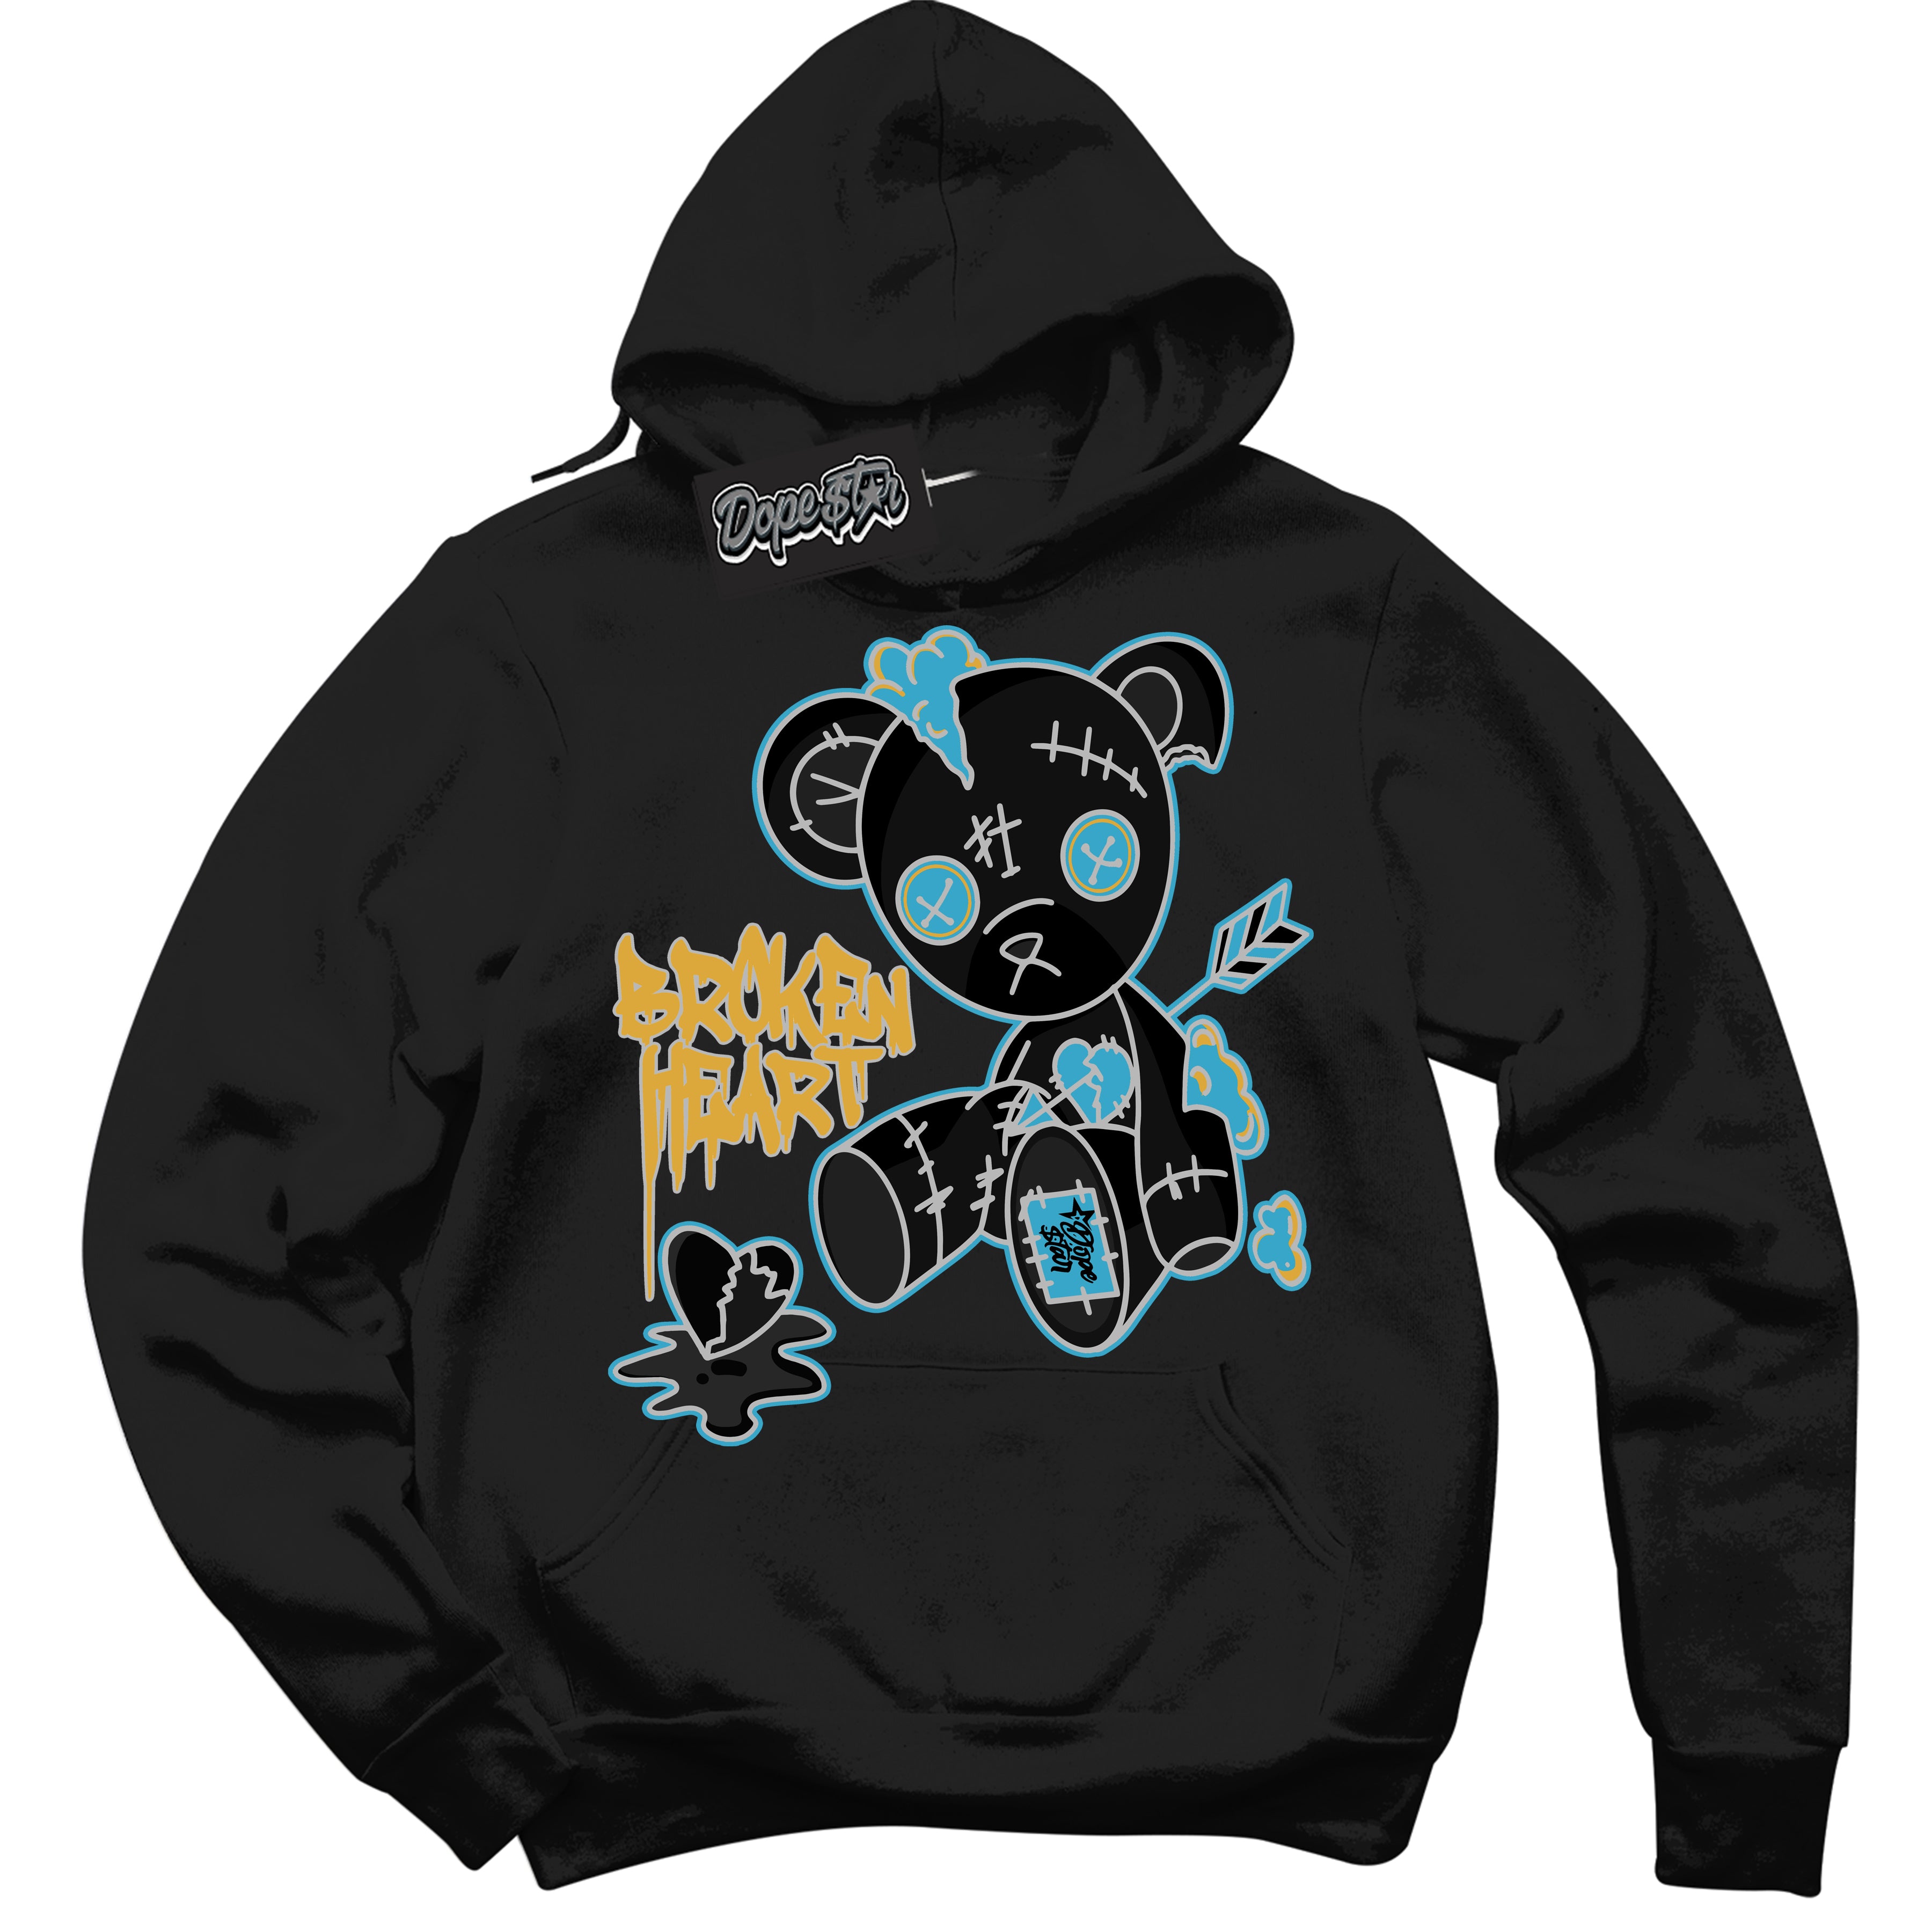 Cool Black Hoodie with “ Broken Heart Bear ”  design that Perfectly Matches Aqua 5s Sneakers.